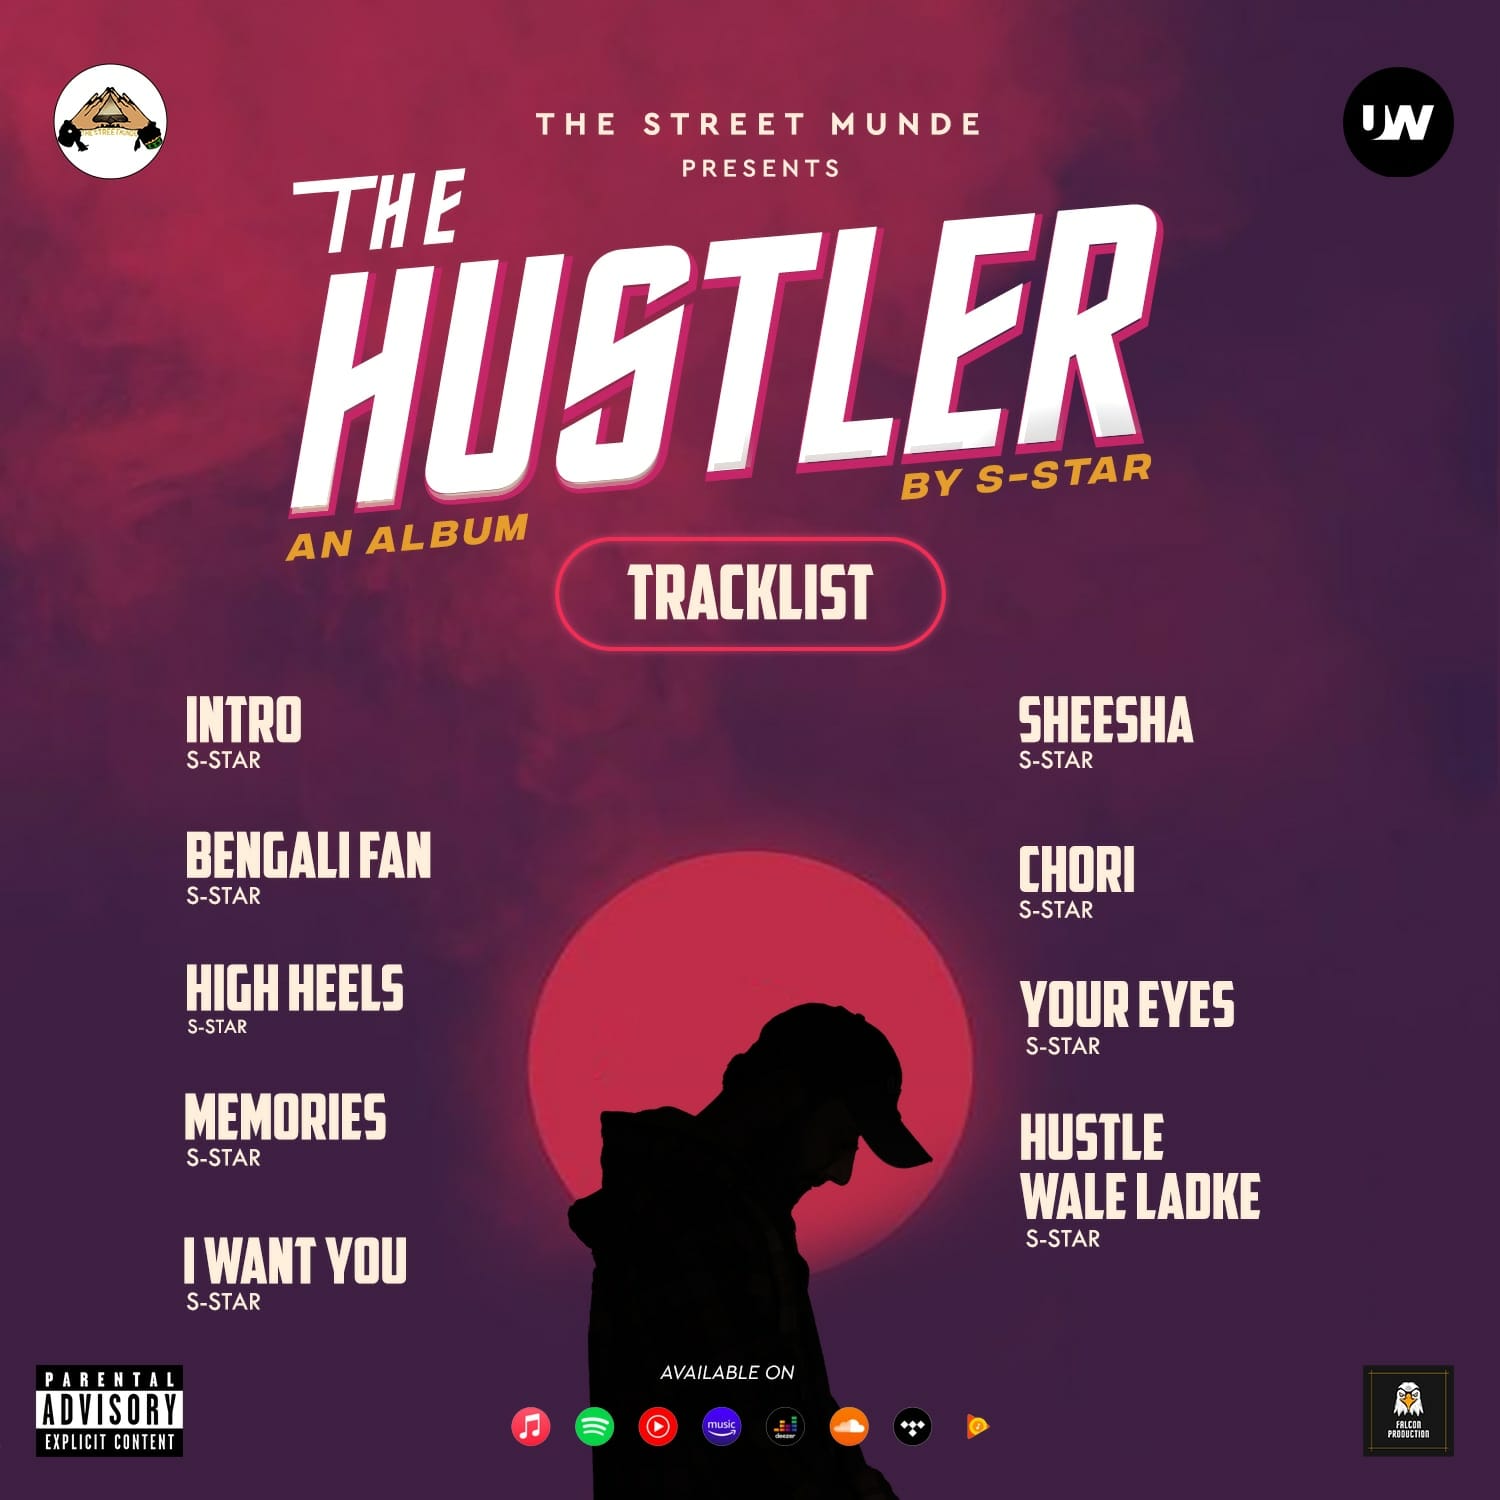 After sensational success of ‘From The Hills’, S-STAR brings second studio album ‘The Hustler’